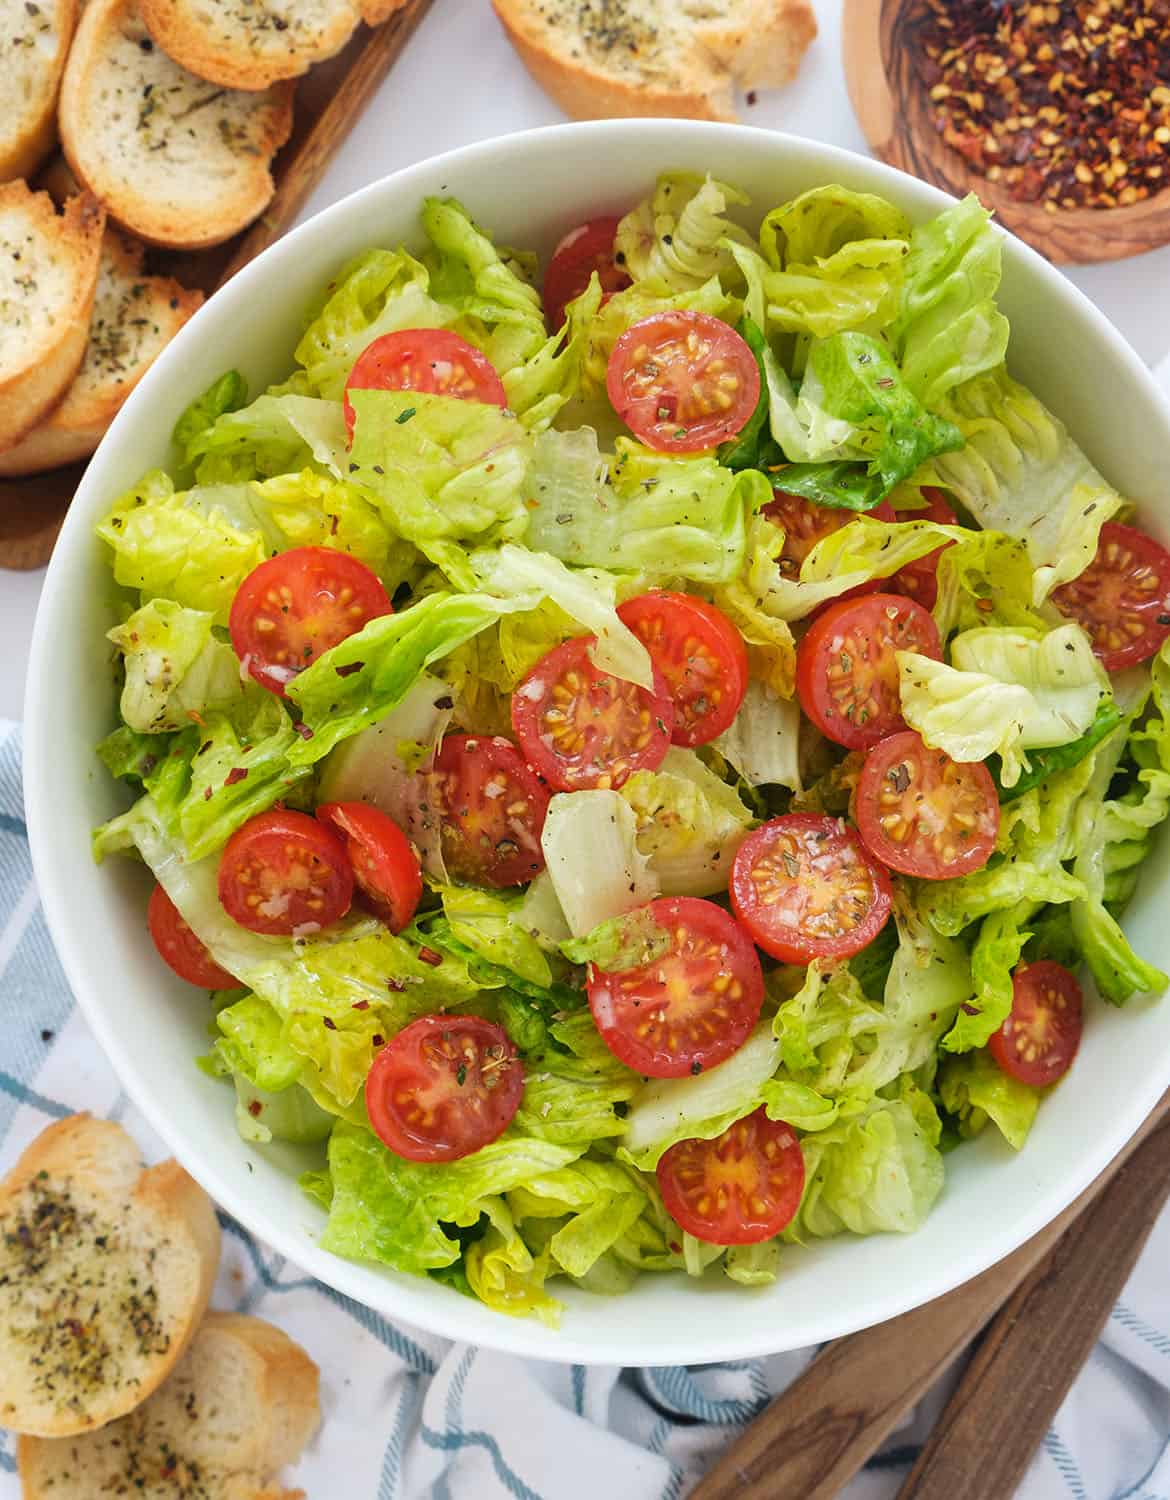 Image of Tomatoes and lettuce